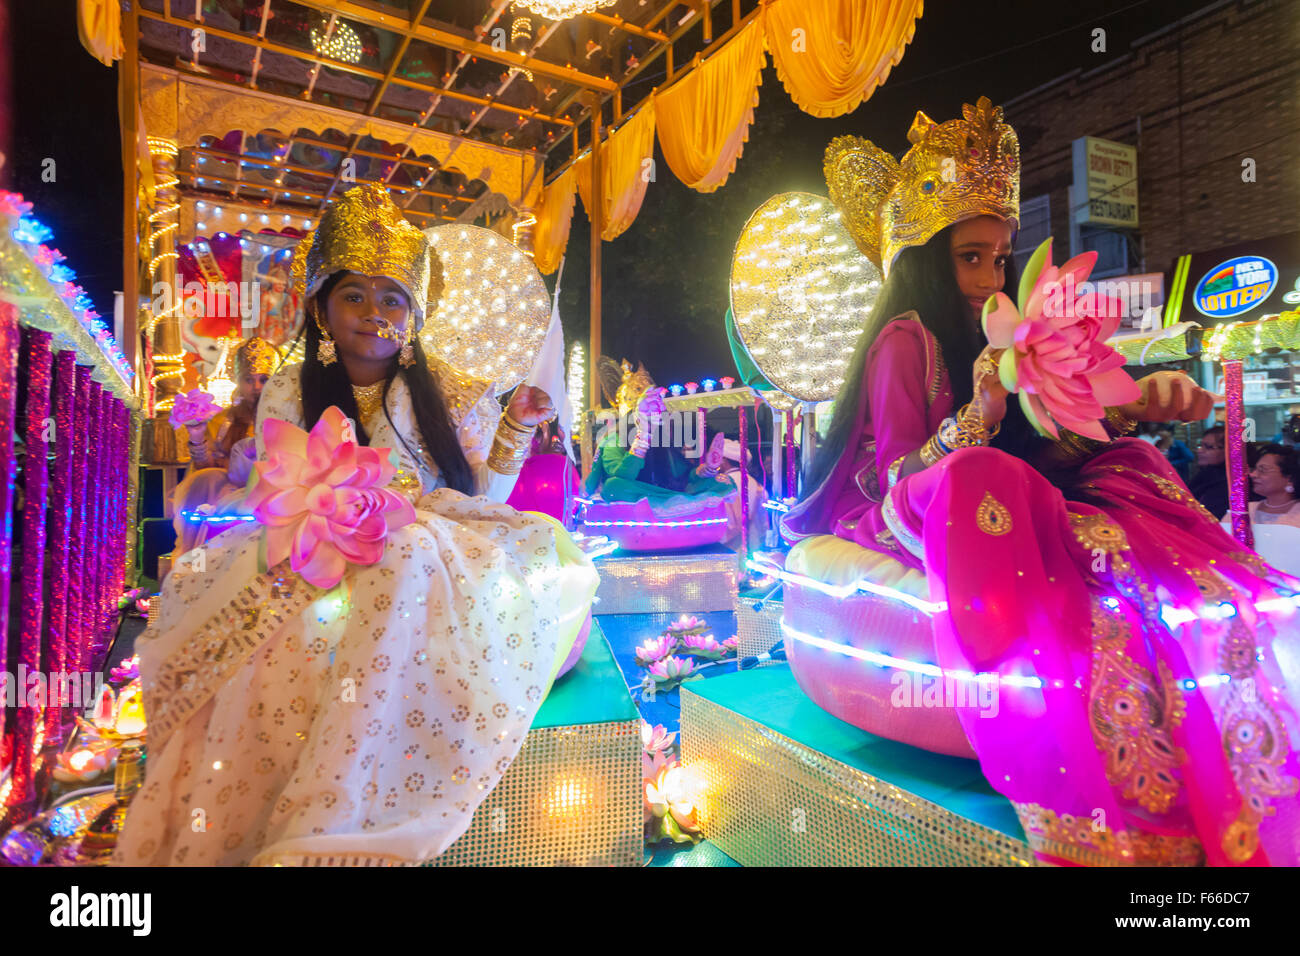 Cars and floats festooned with lights parade down Liberty Avenue in the Richmond Hill neighborhood of Queens in New York in celebration of the Guyanese Hindu festival of lights, Diwali   on Saturday, November 7, 2015.  The neighborhood of Richmond Hill is a polyglot of ethnic cultures and home to one of the largest populations in the Guyanese Hindu diaspora. (© Richard B. Levine) Stock Photo